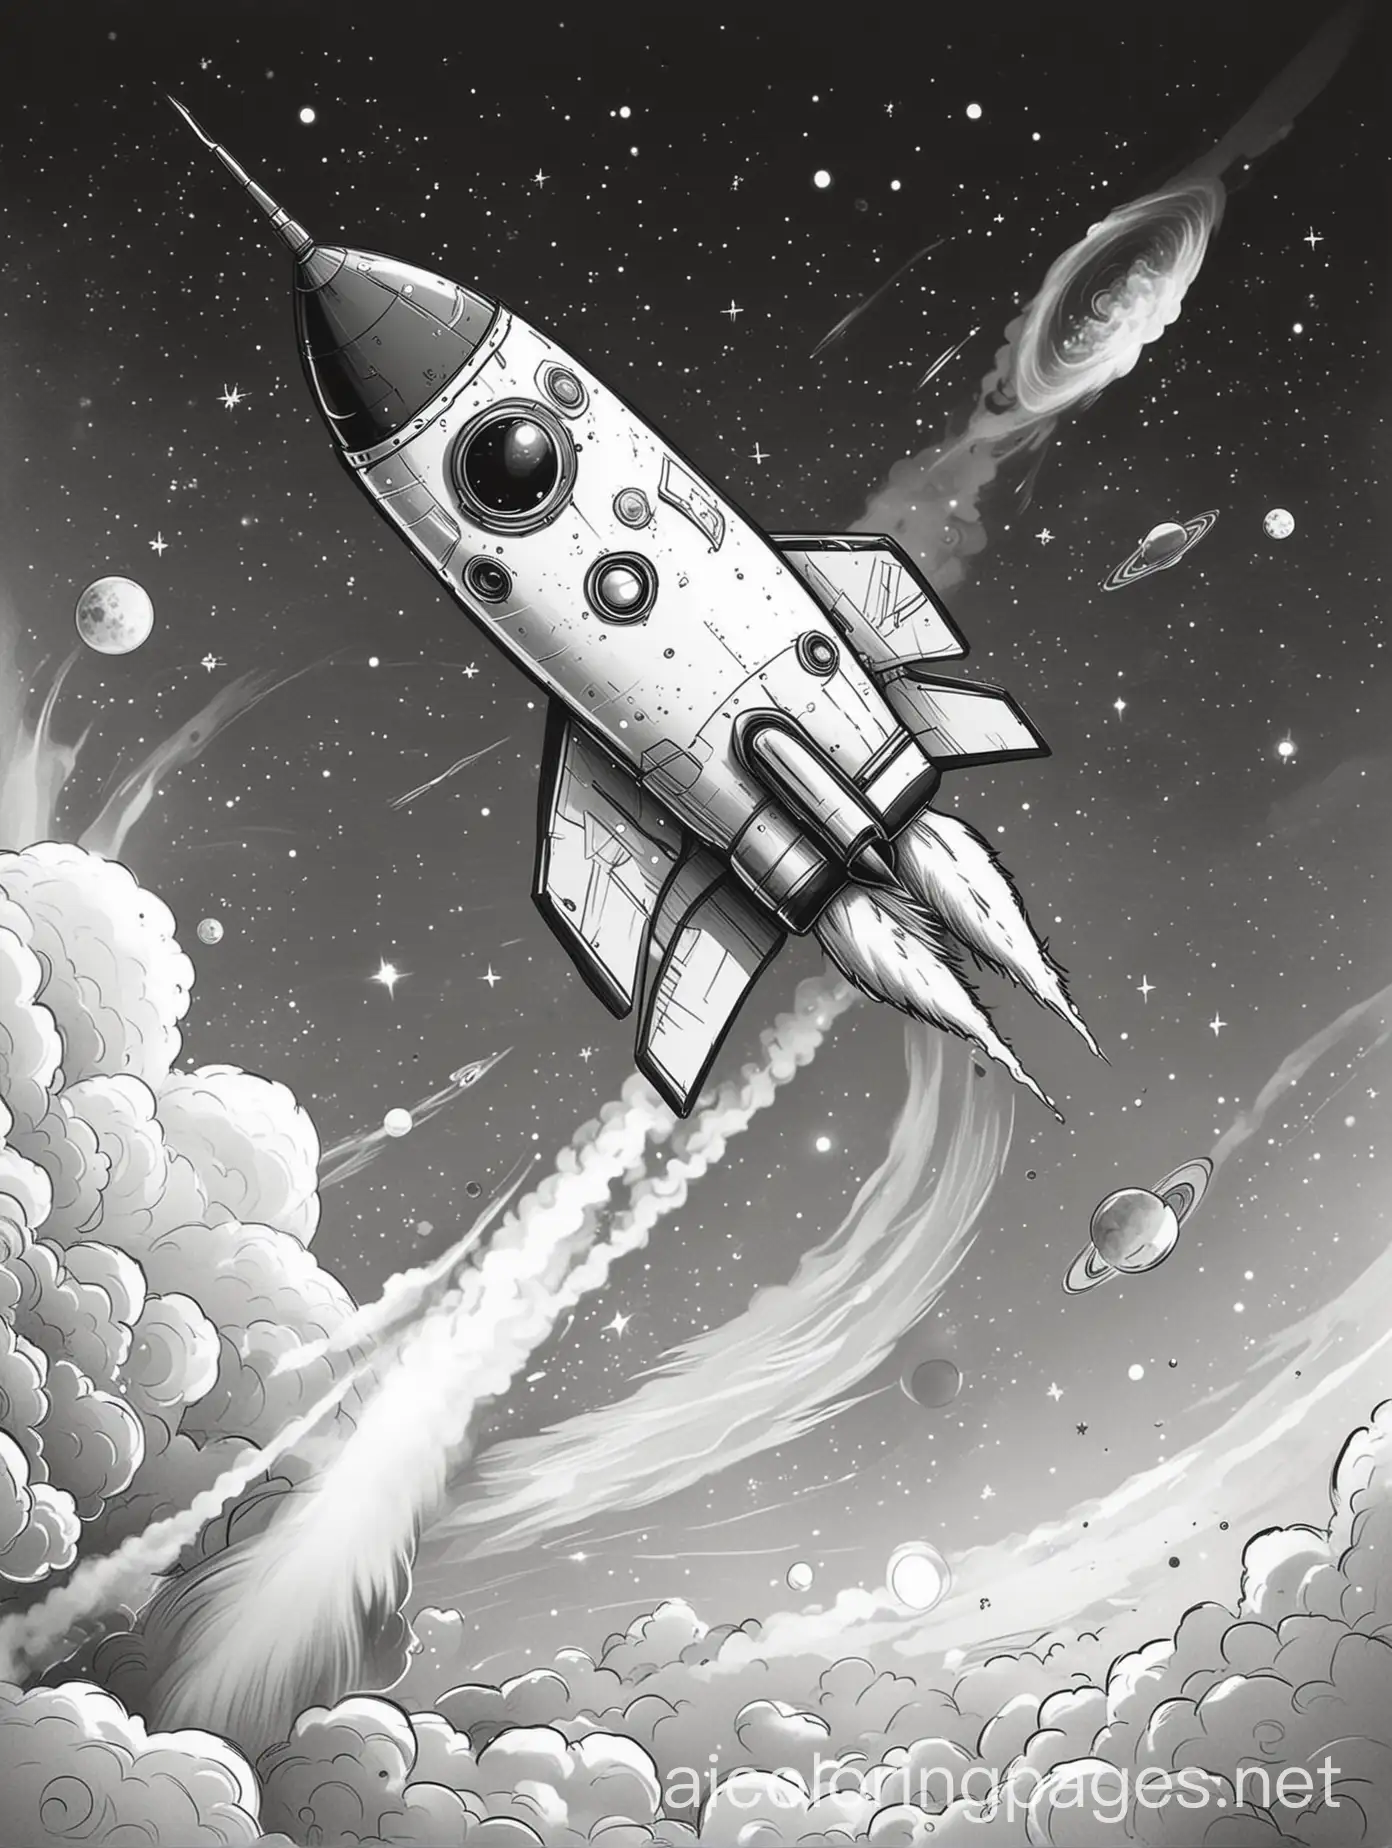 Cute little cartoon style rocket in outer space flying over a planet, smoky and haze surroundings, Coloring Page, black and white, line art, white background, Simplicity, Ample White Space.